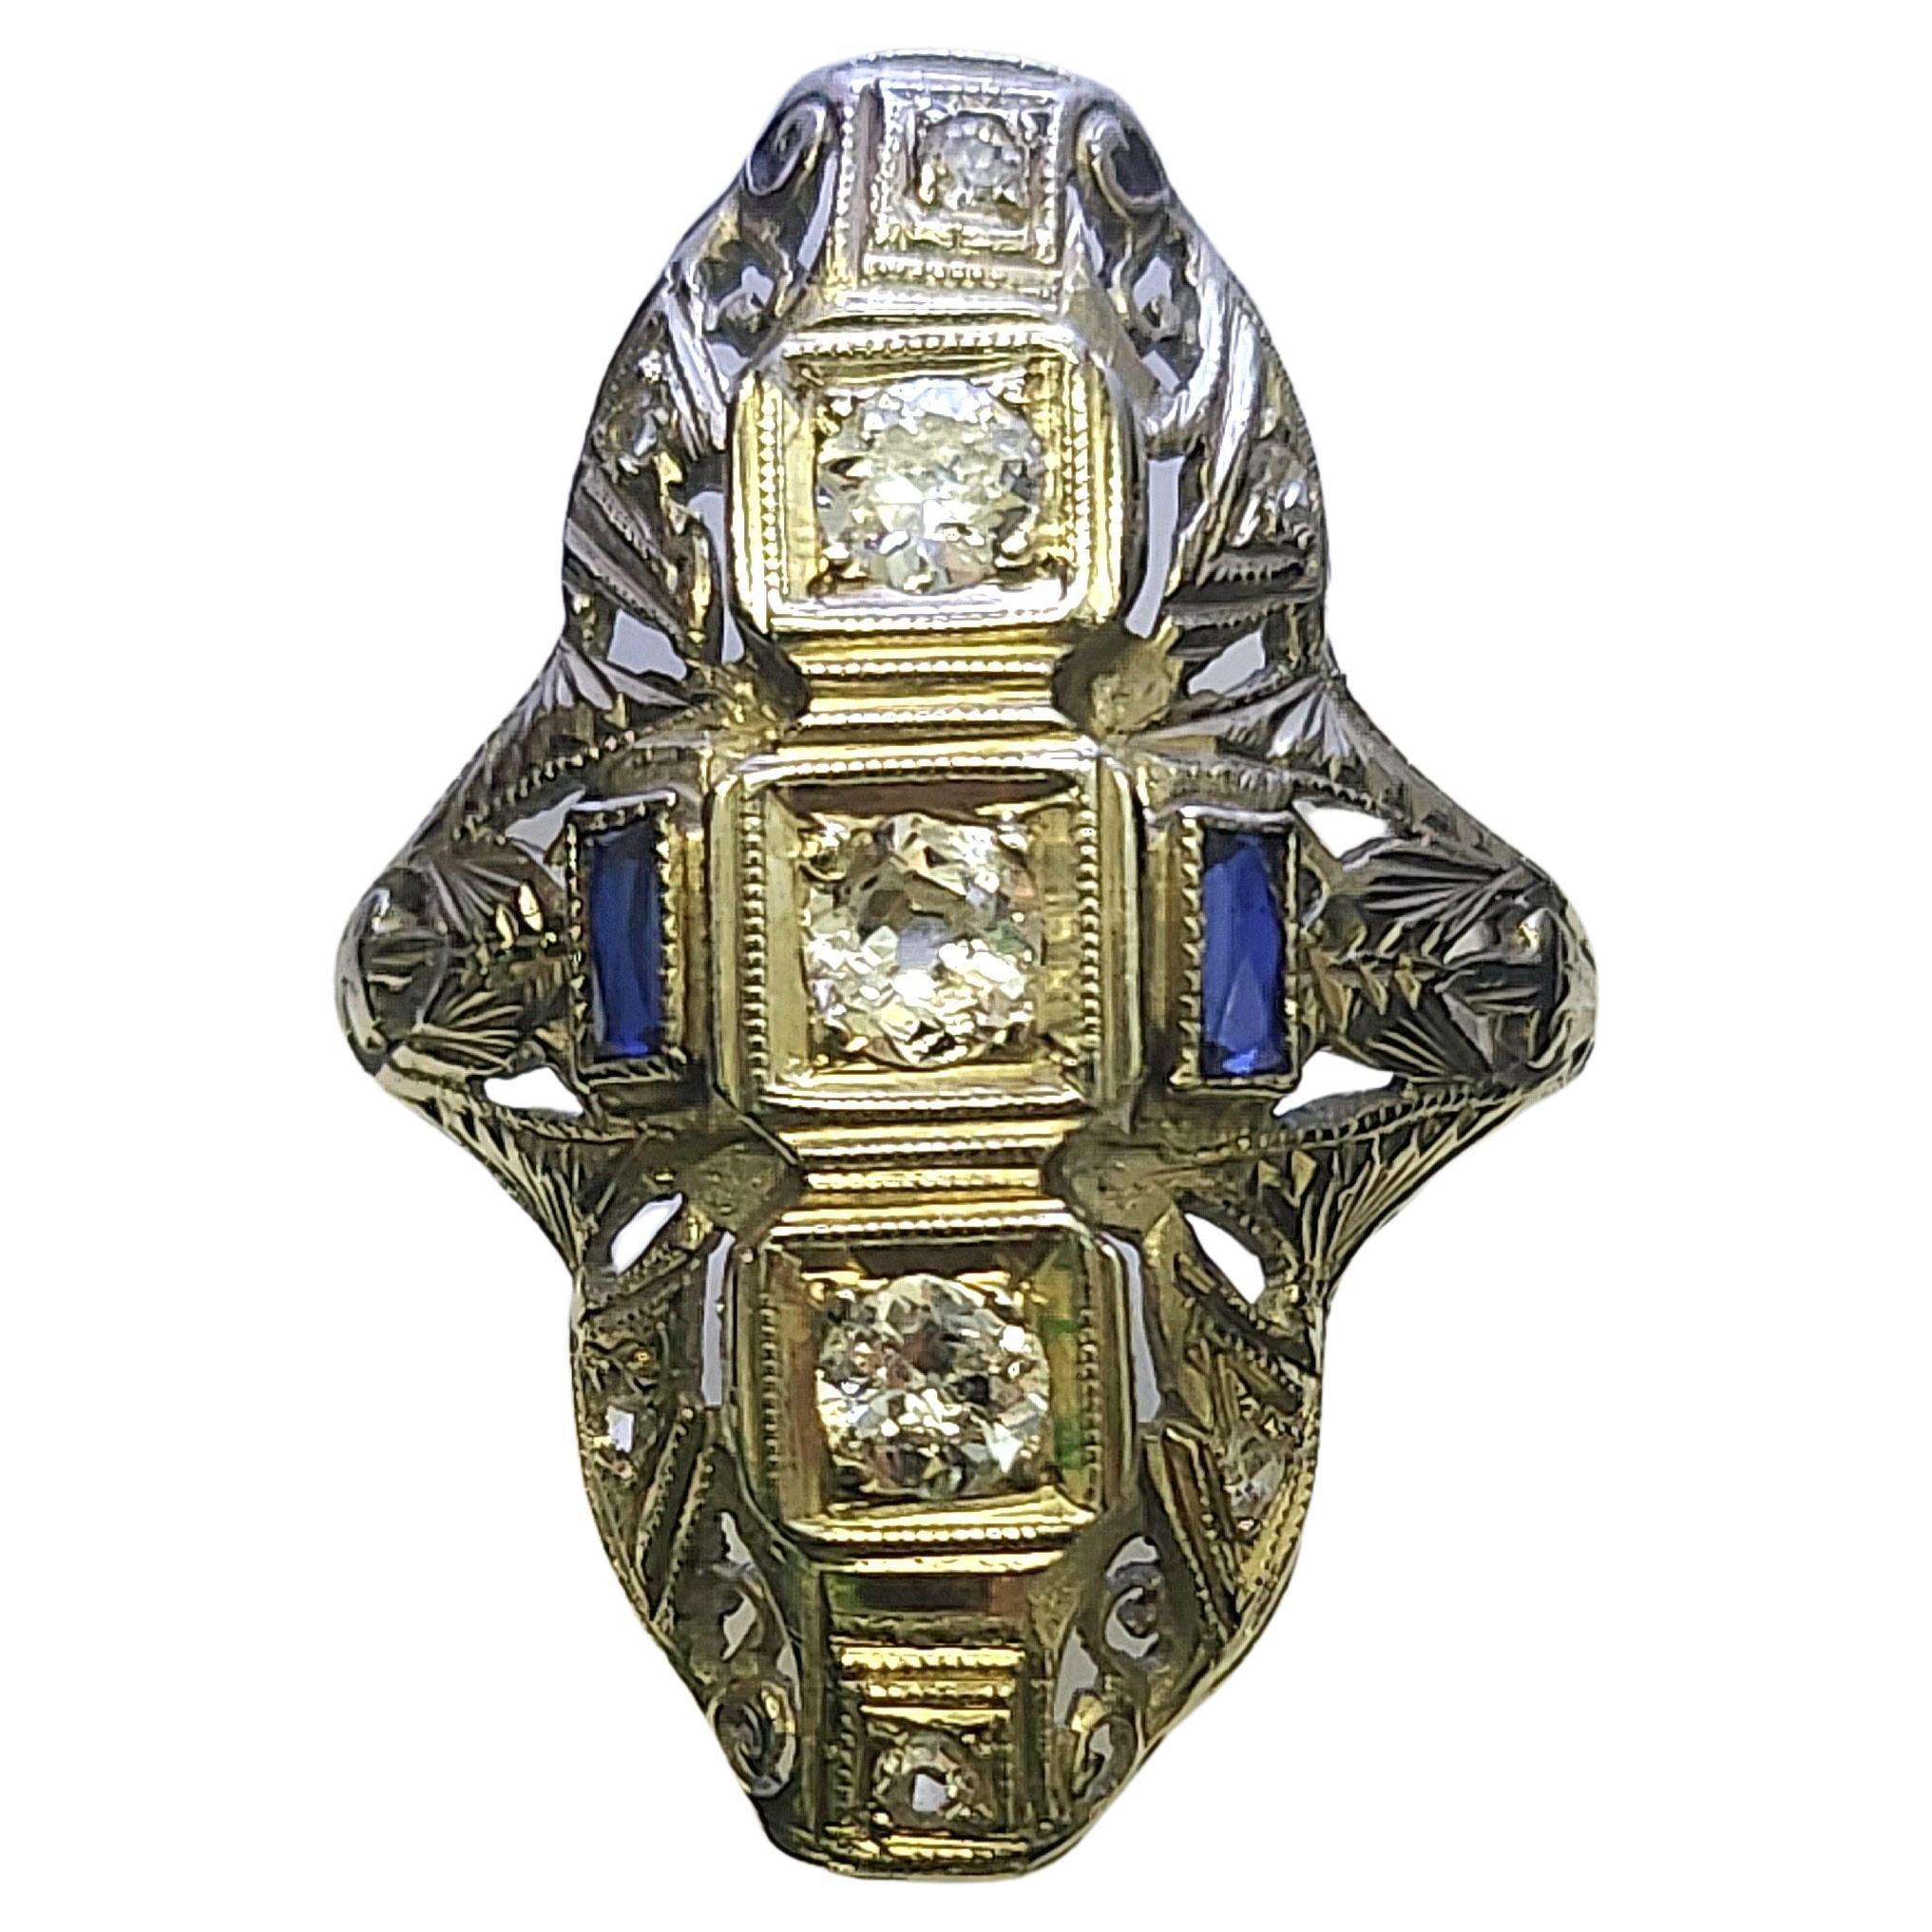 Art deco large ring in 18k white gold and old european cut diamonds with an estimate weight of 0.50 carats flanked with blue sapphire ring head diameter 25mm×11mm width and total gold weight 4.50 grams hall marked 18k dates back to europe 1920s